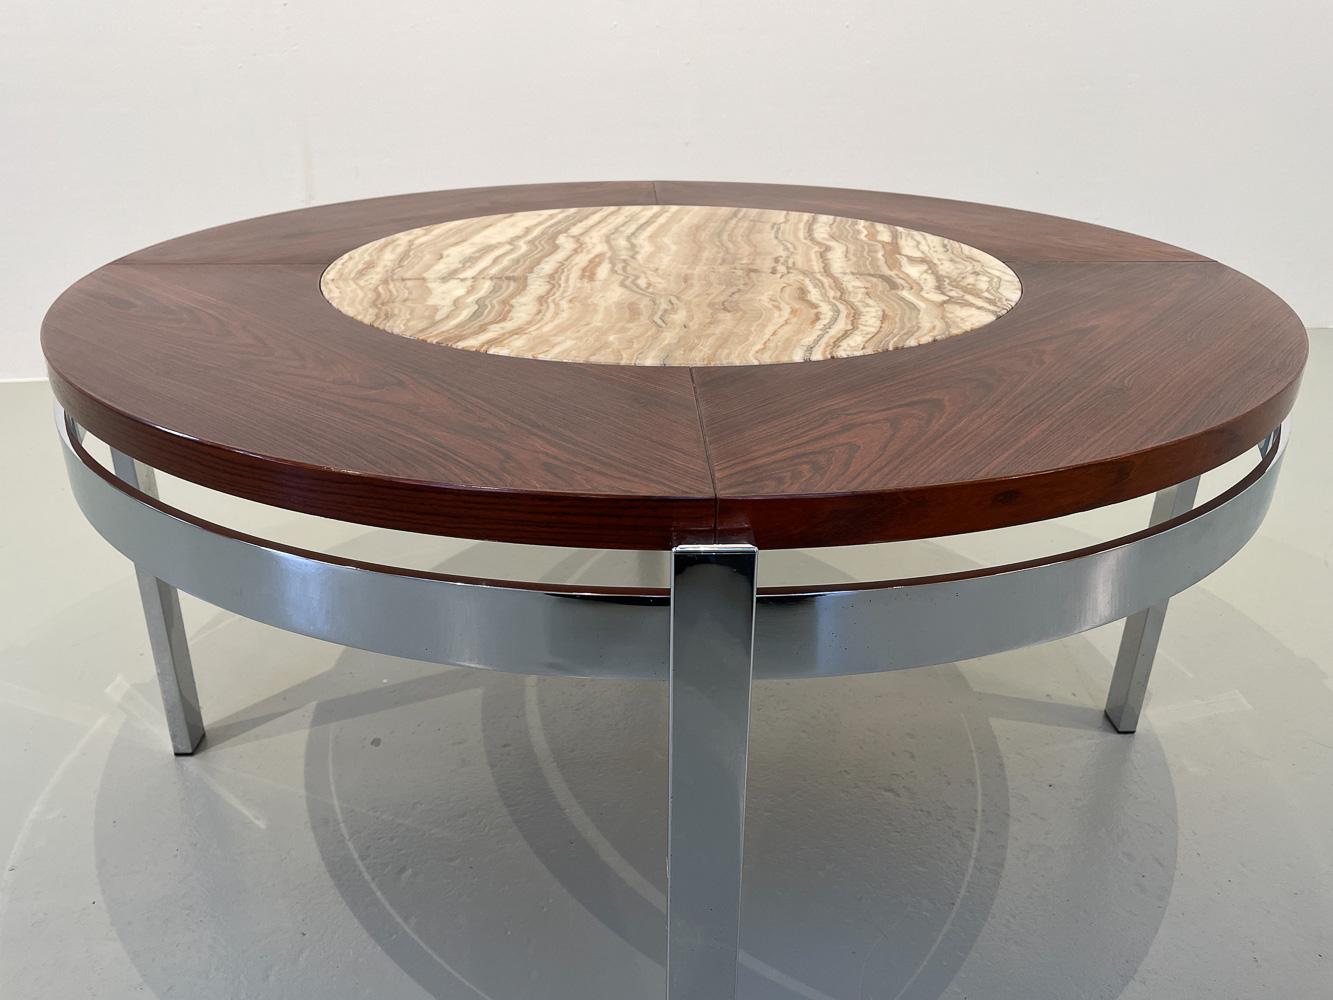 Danish Modern Round Rosewood and Marble Coffee Table by Bendixen Design, 1970s. For Sale 8